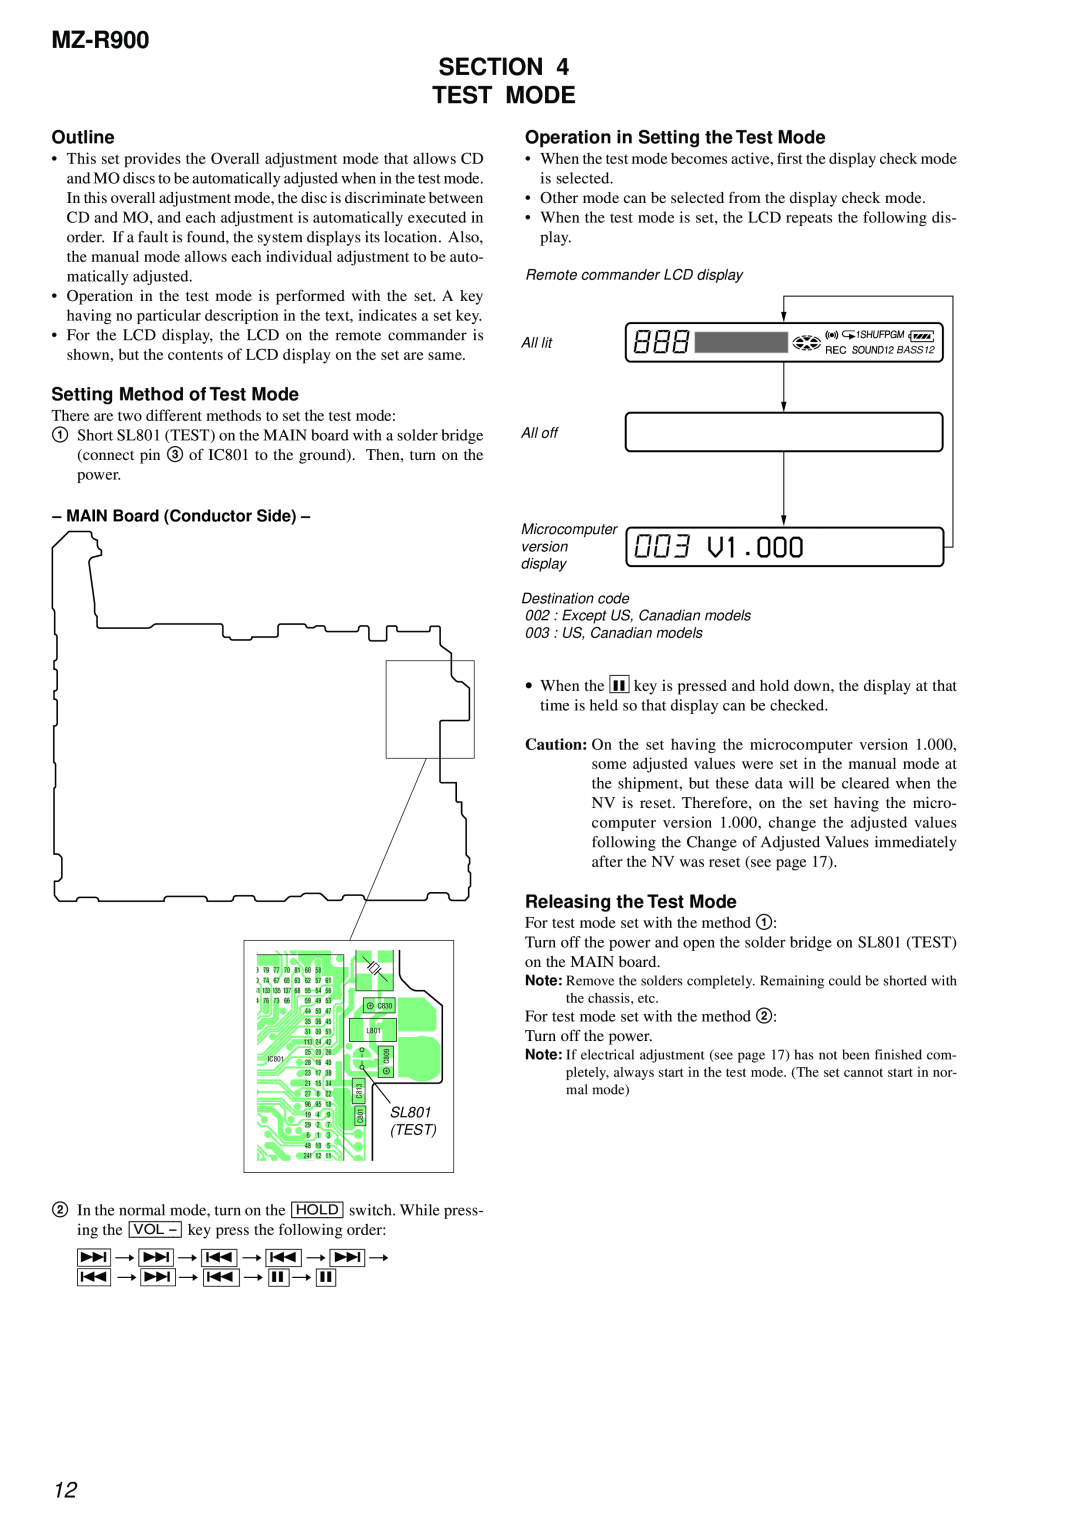 Sony service manual MZ-R900 SECTION TEST MODE, Outline, Setting Method of Test Mode, Operation in Setting the Test Mode 